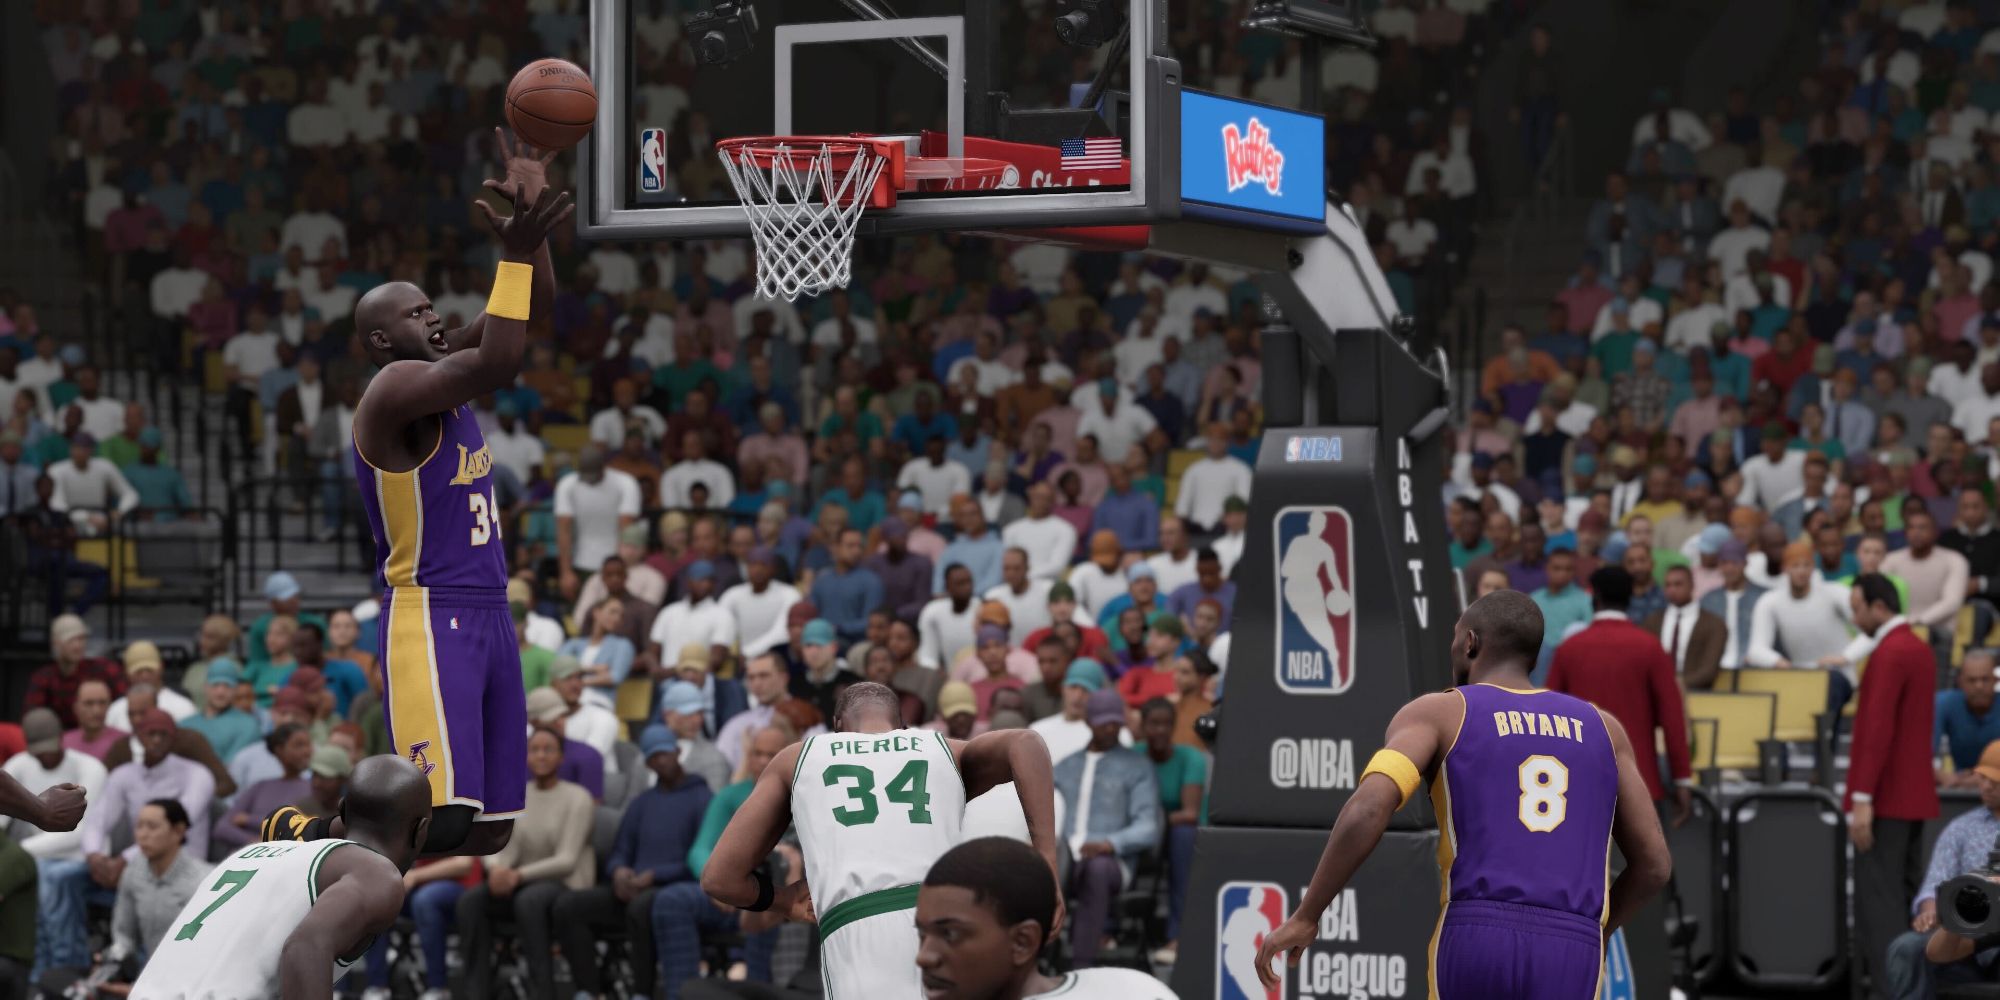 Kobe Bryant alley-ooping the ball to Shaquille O'Neill in NBA 2K23